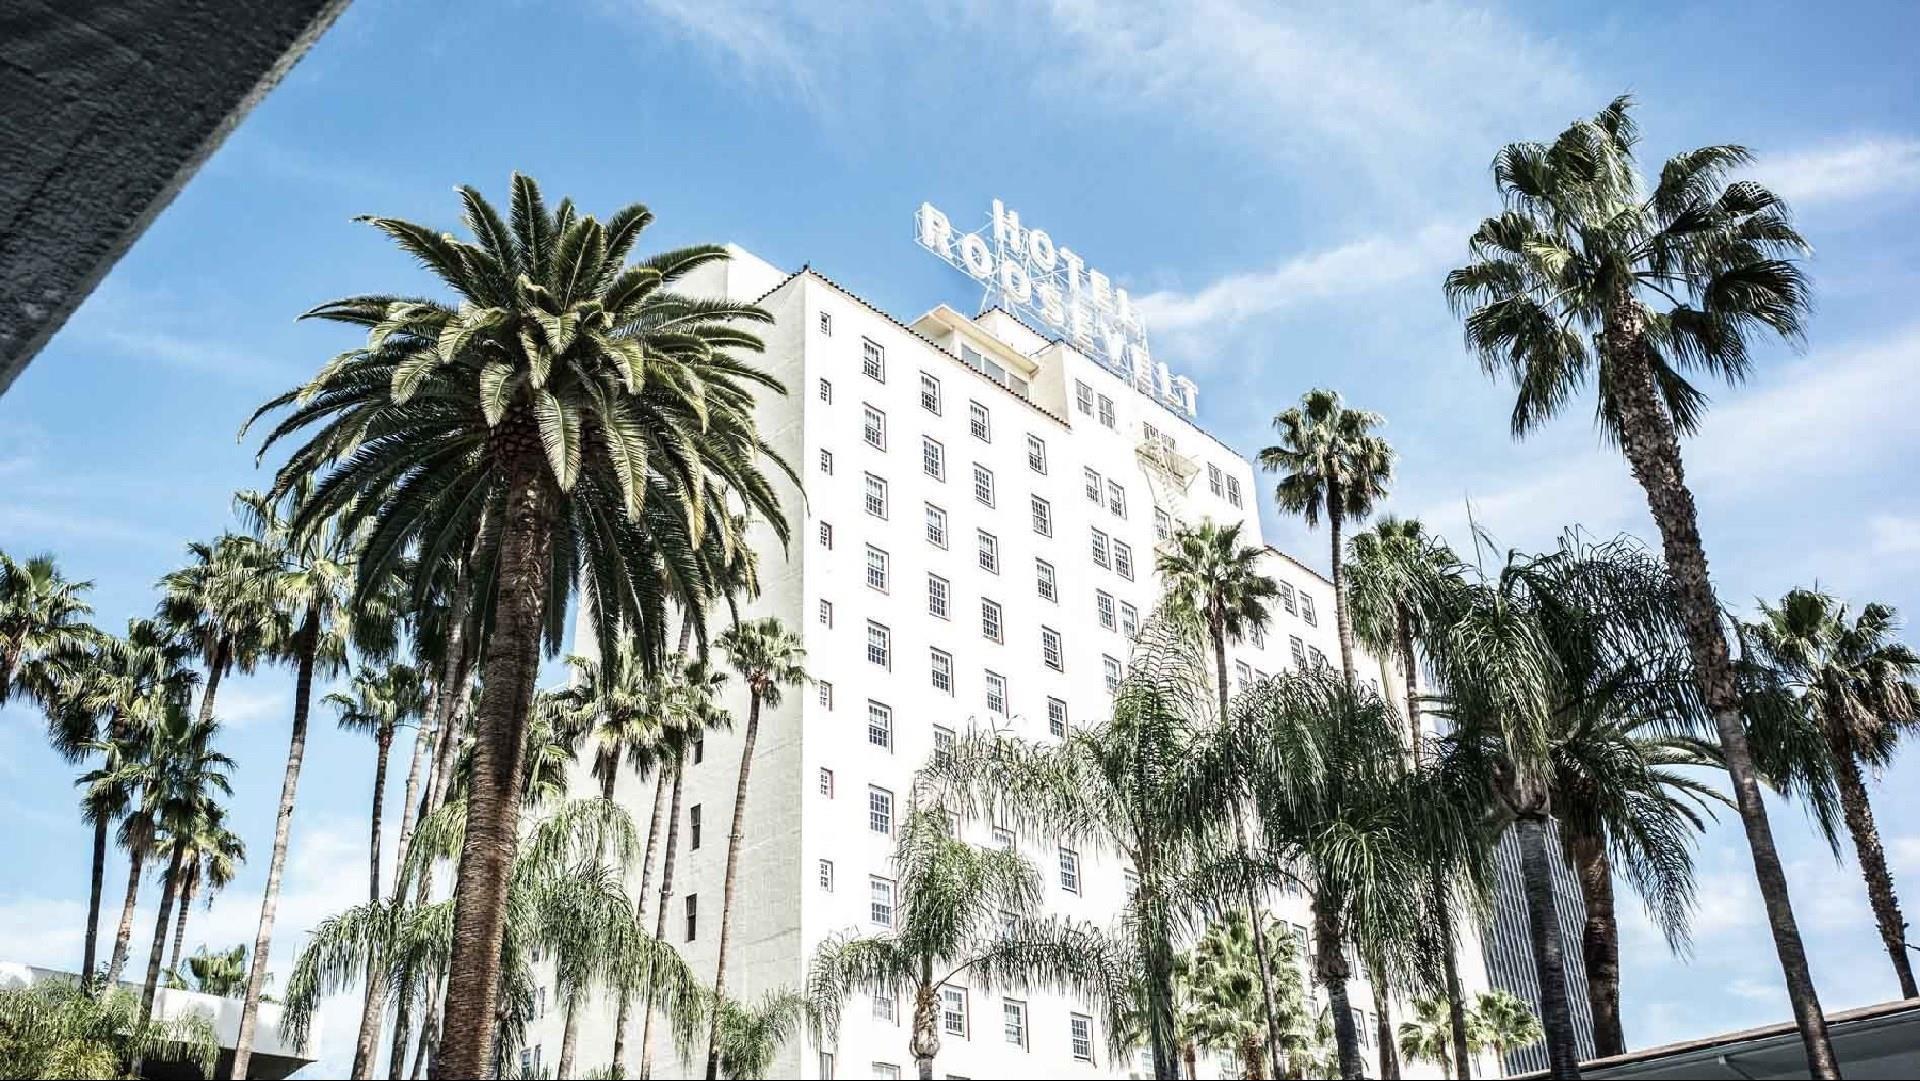 The Hollywood Roosevelt in Los Angeles, CA